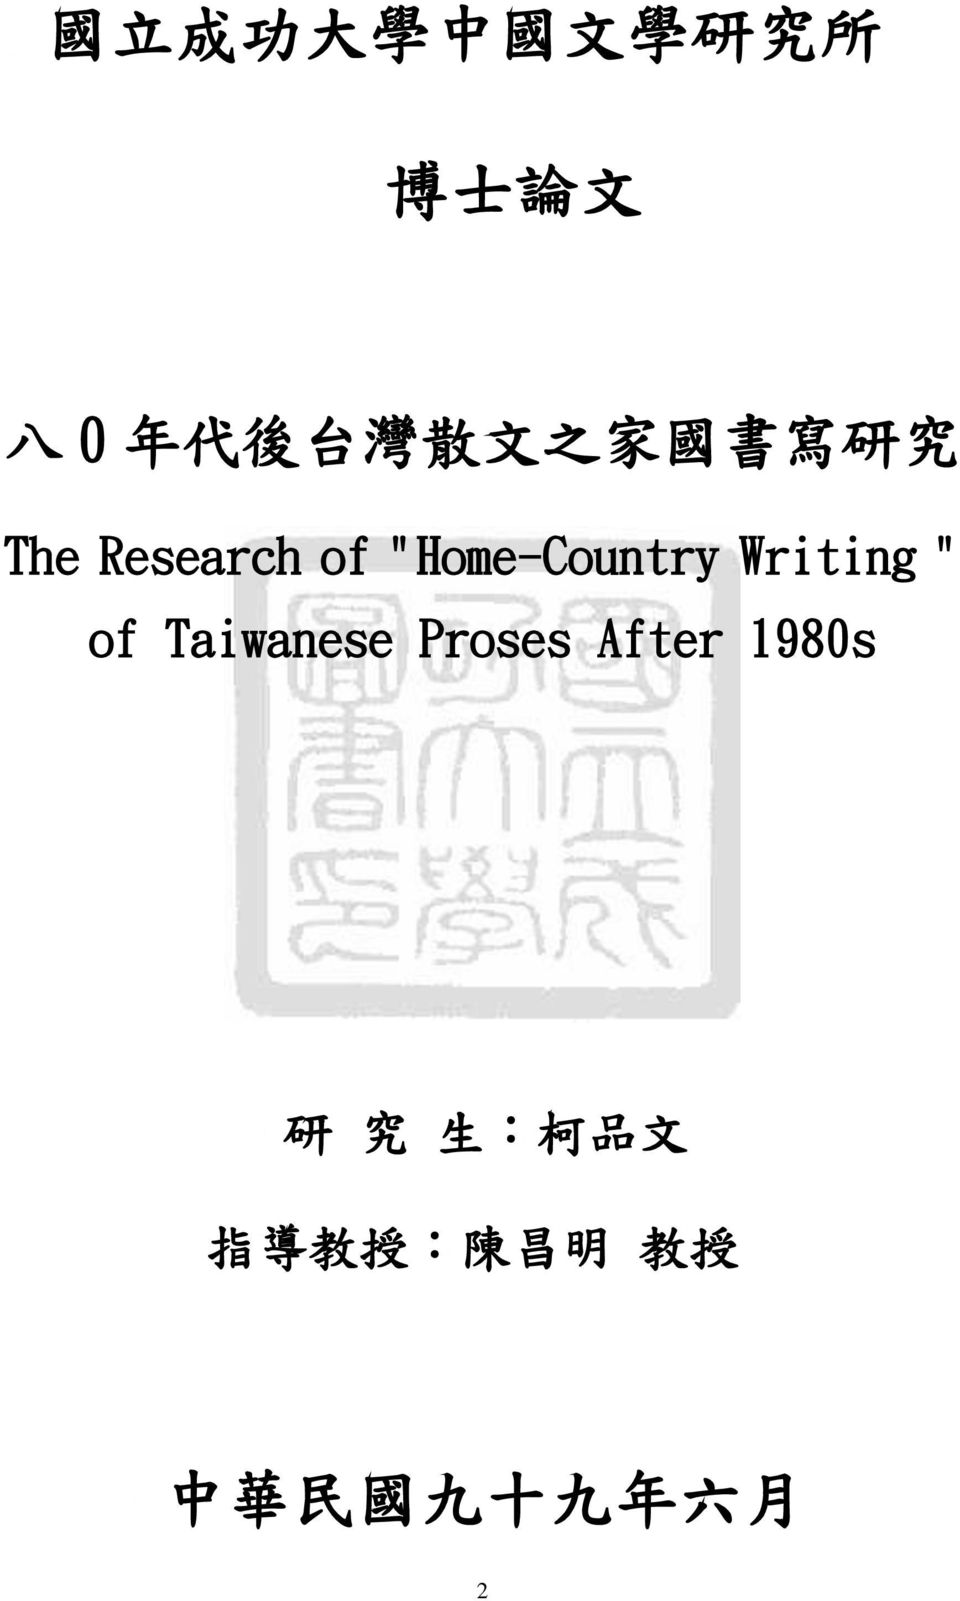 Writing " of Taiwanese Proses After 1980s 研 究 生